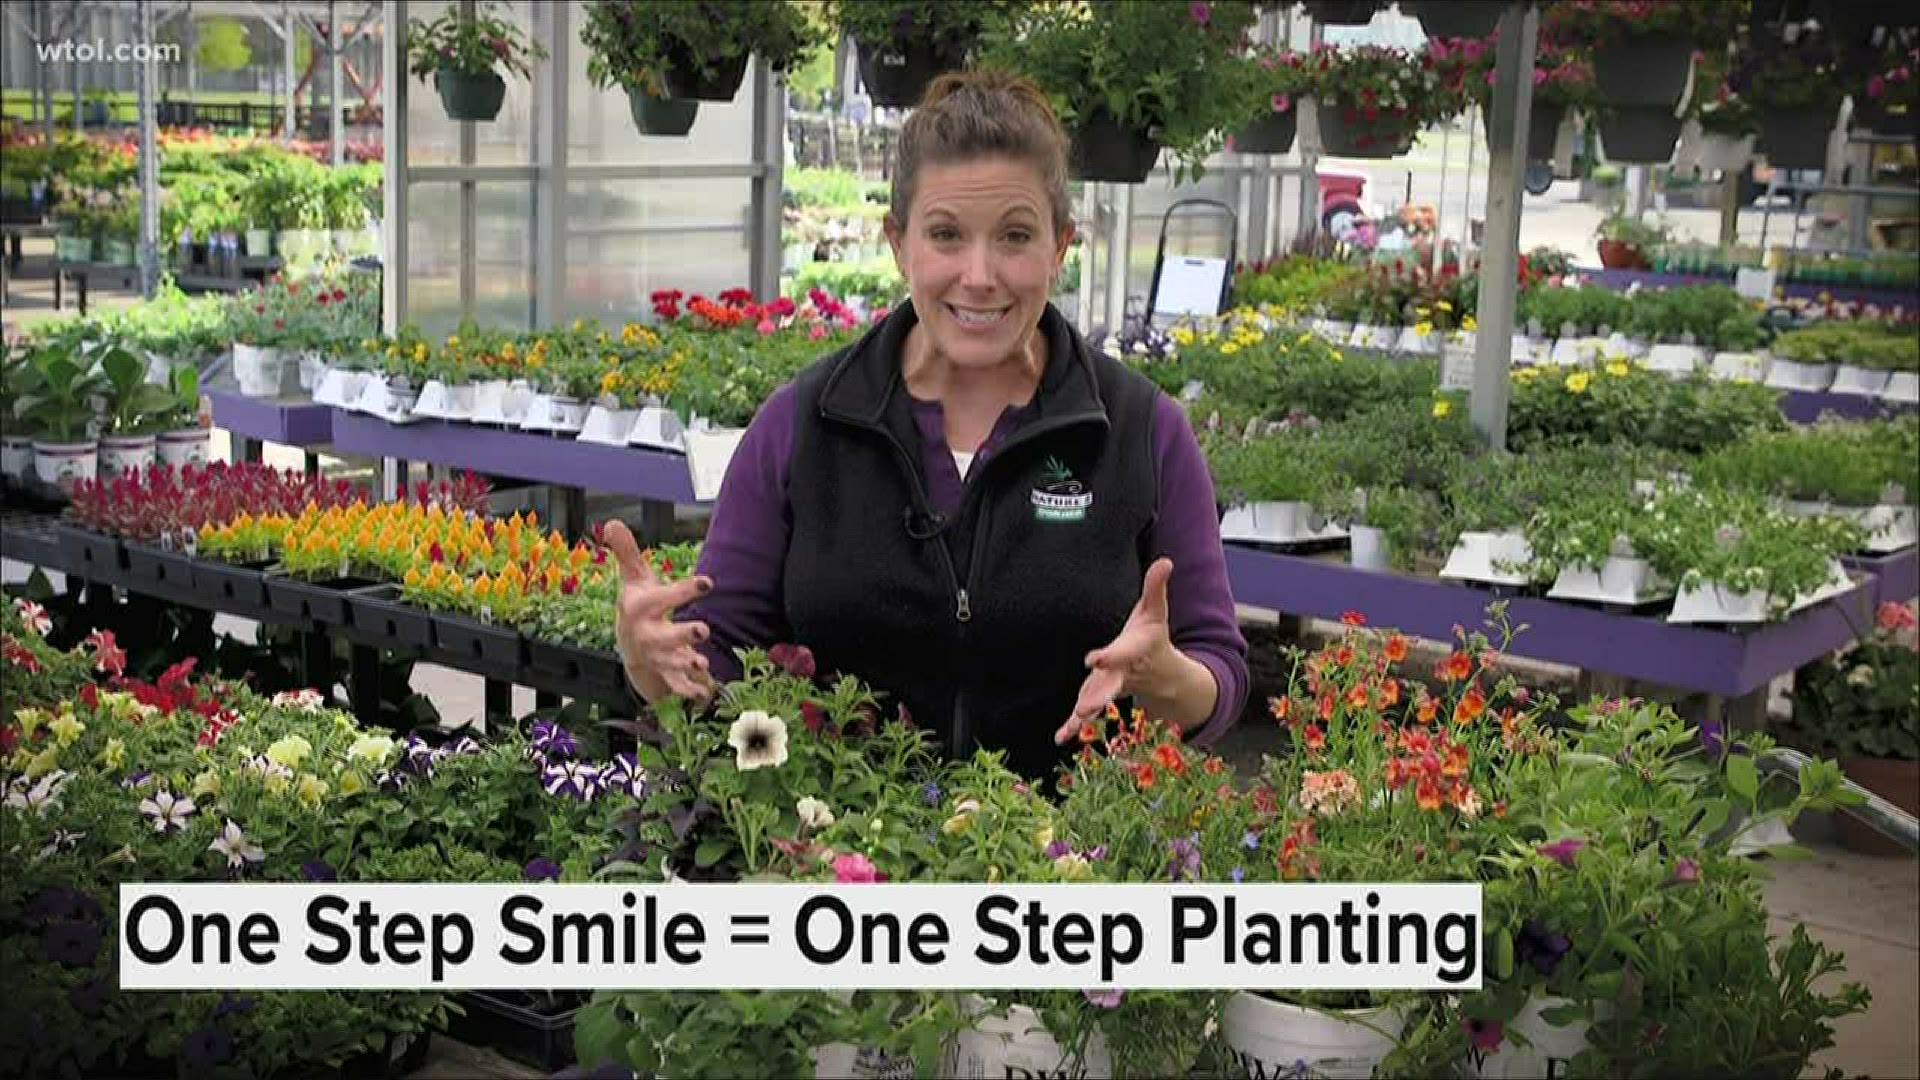 Jennifer with Nature's Corner explains everything you need to know about one-step planting and your spring flower garden.